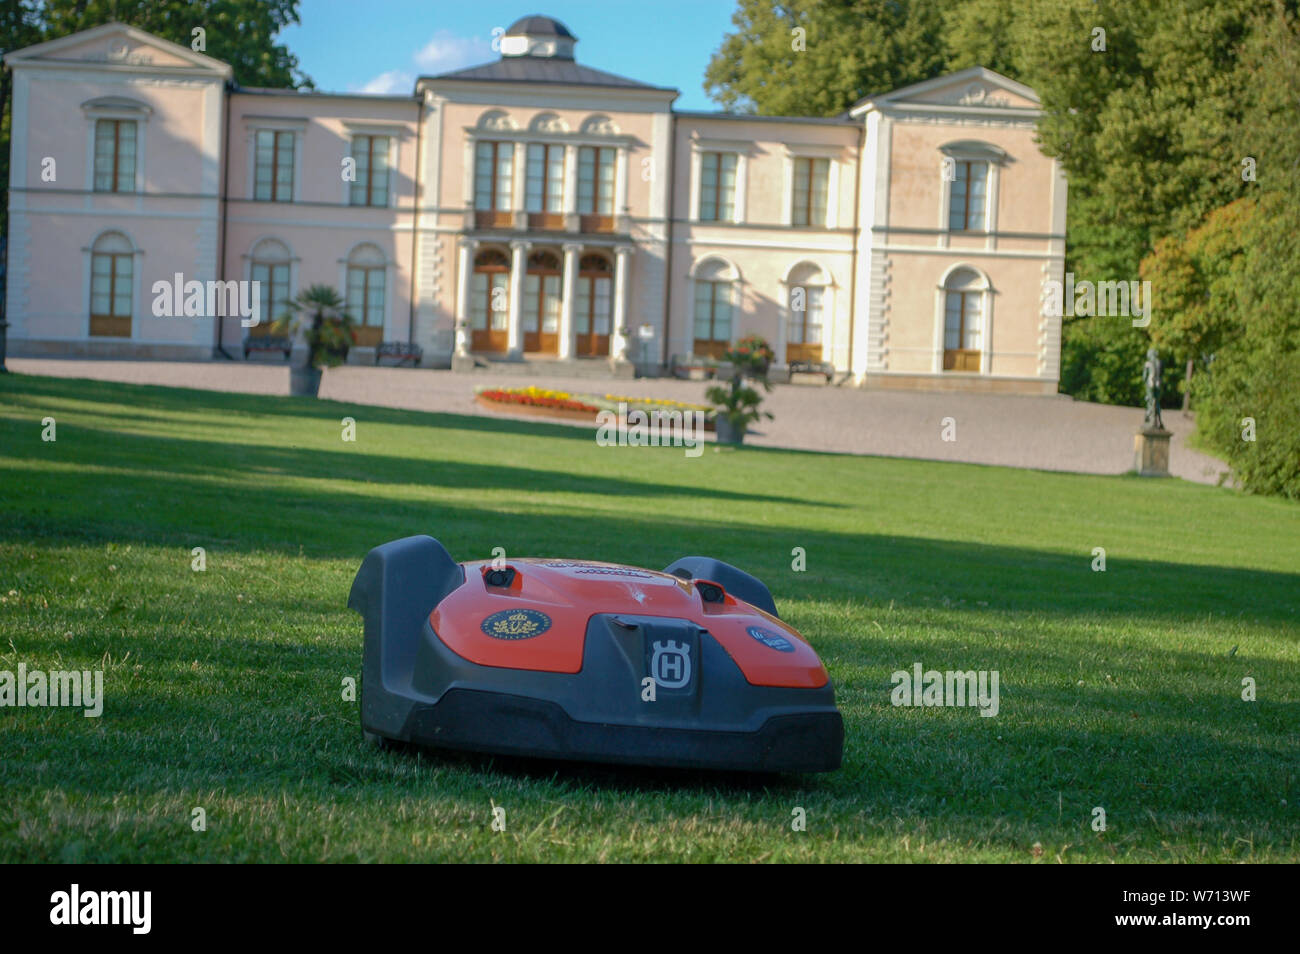 Red Husqvarna robot lawn mower cutting grass on green lawn with castle and blue sky in background, Djurgården, Stockholm, Sweden, Europe Stock Photo